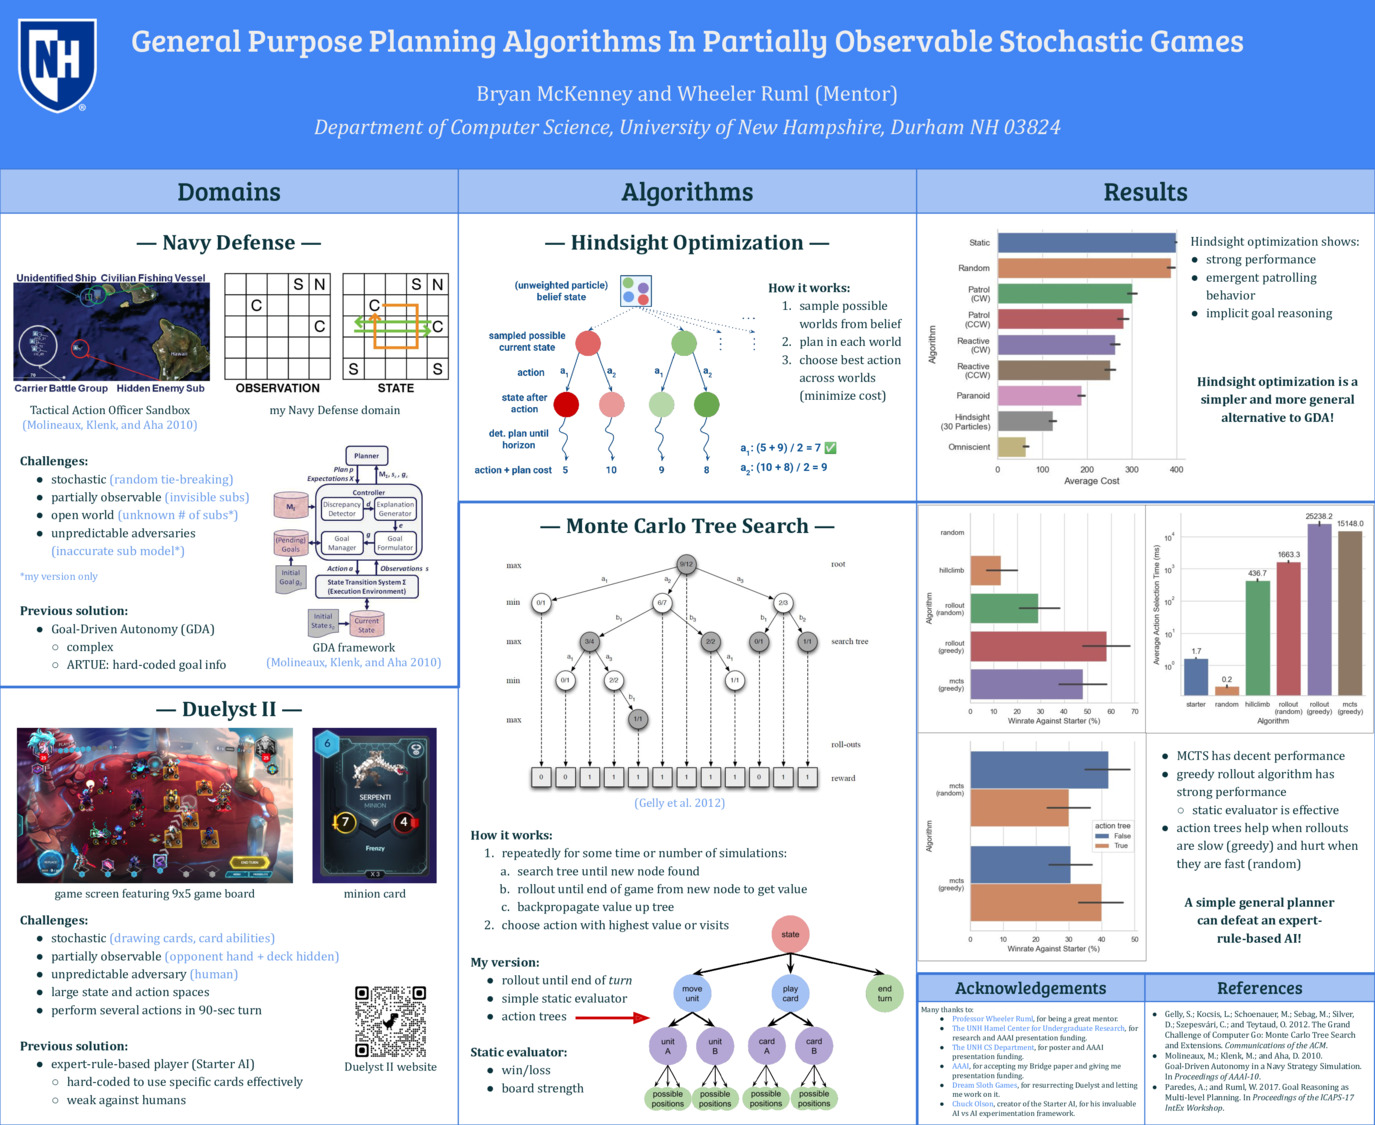 General Purpose Planning Algorithms In Partially Observable Stochastic Games by bfm1009